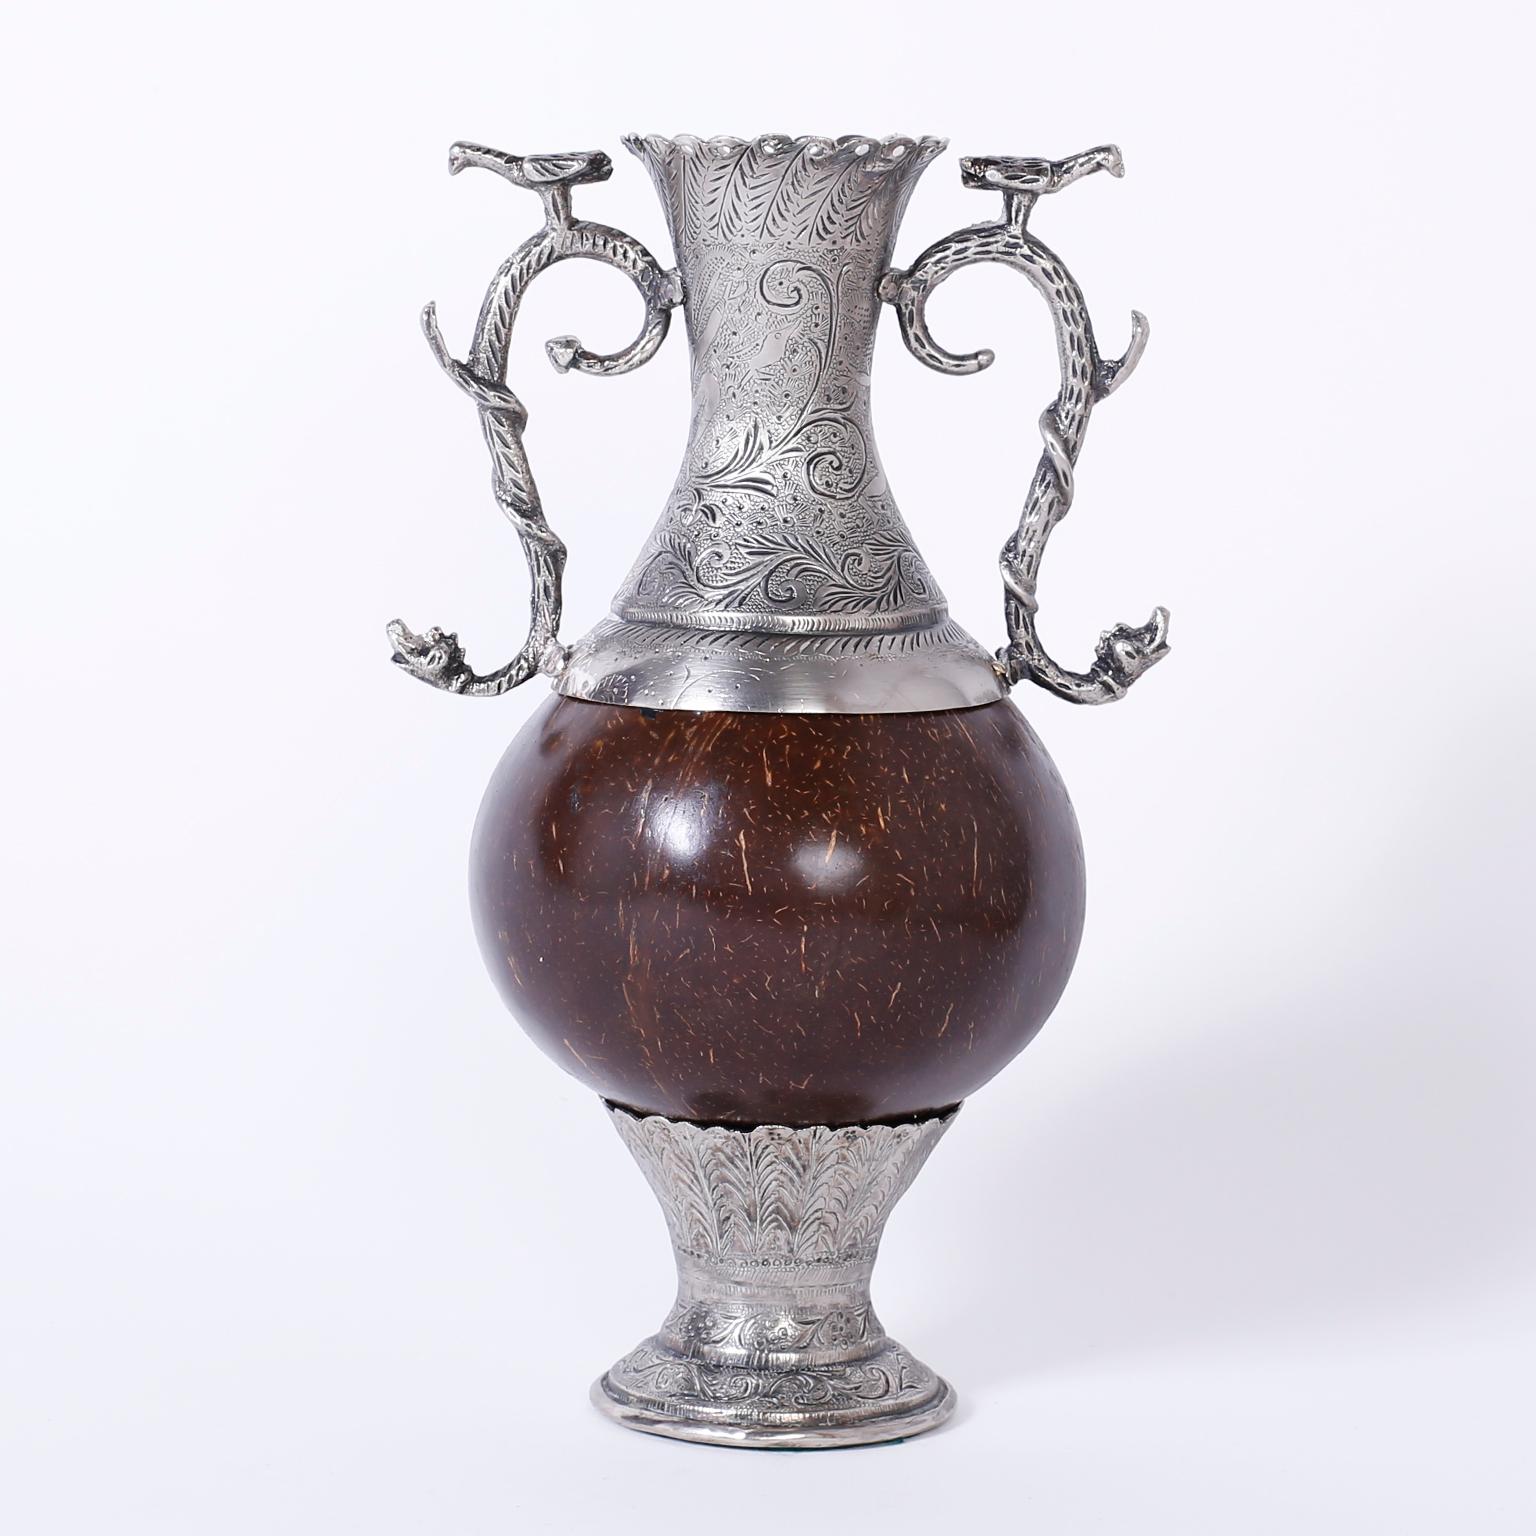 Antique Spanish Colonial vase with an unusual combination of materials. The vase is silvered metal with floral engravings and graceful handles depicting birds on snakes. The center in the Anglo-Indian manner is a polished coconut on a floral